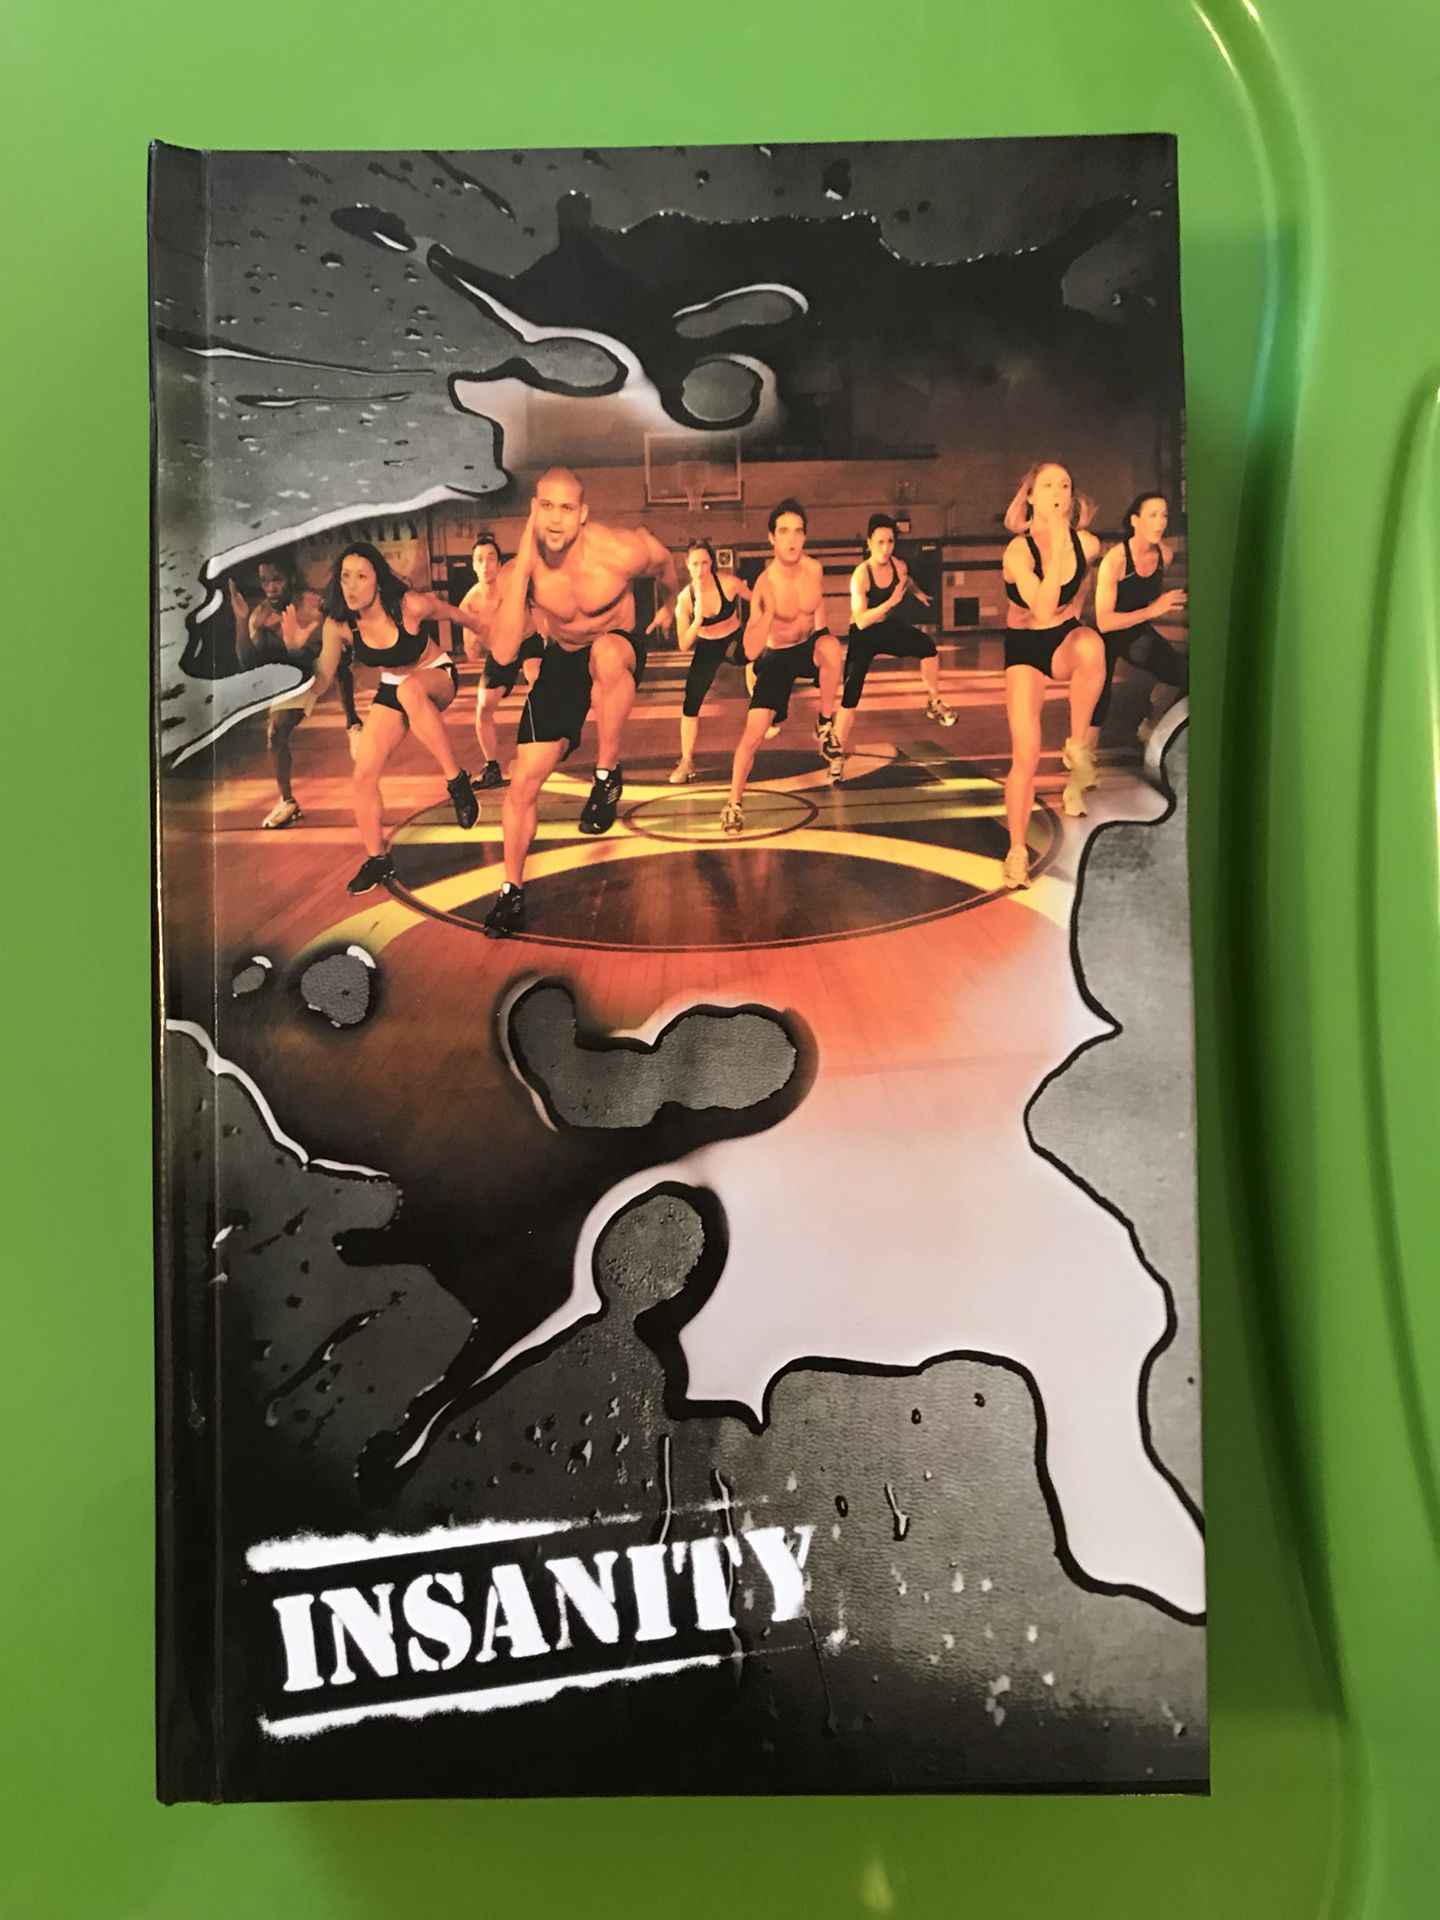 Insanity work out DVD set (12)